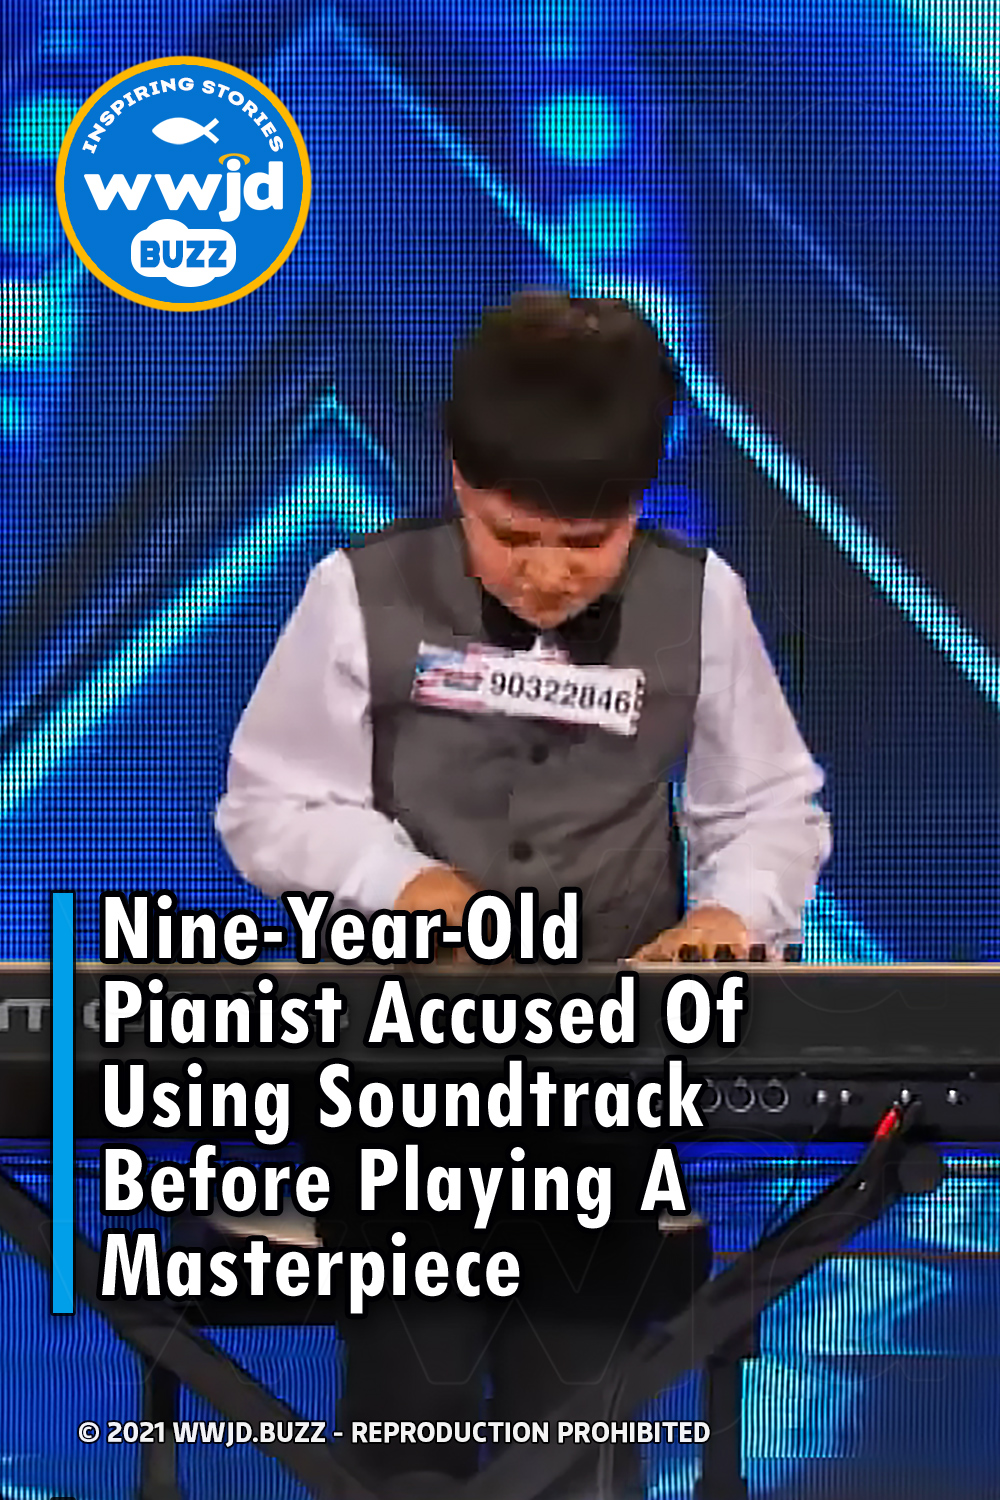 Nine-Year-Old Pianist Accused Of Using Soundtrack Before Playing A Masterpiece